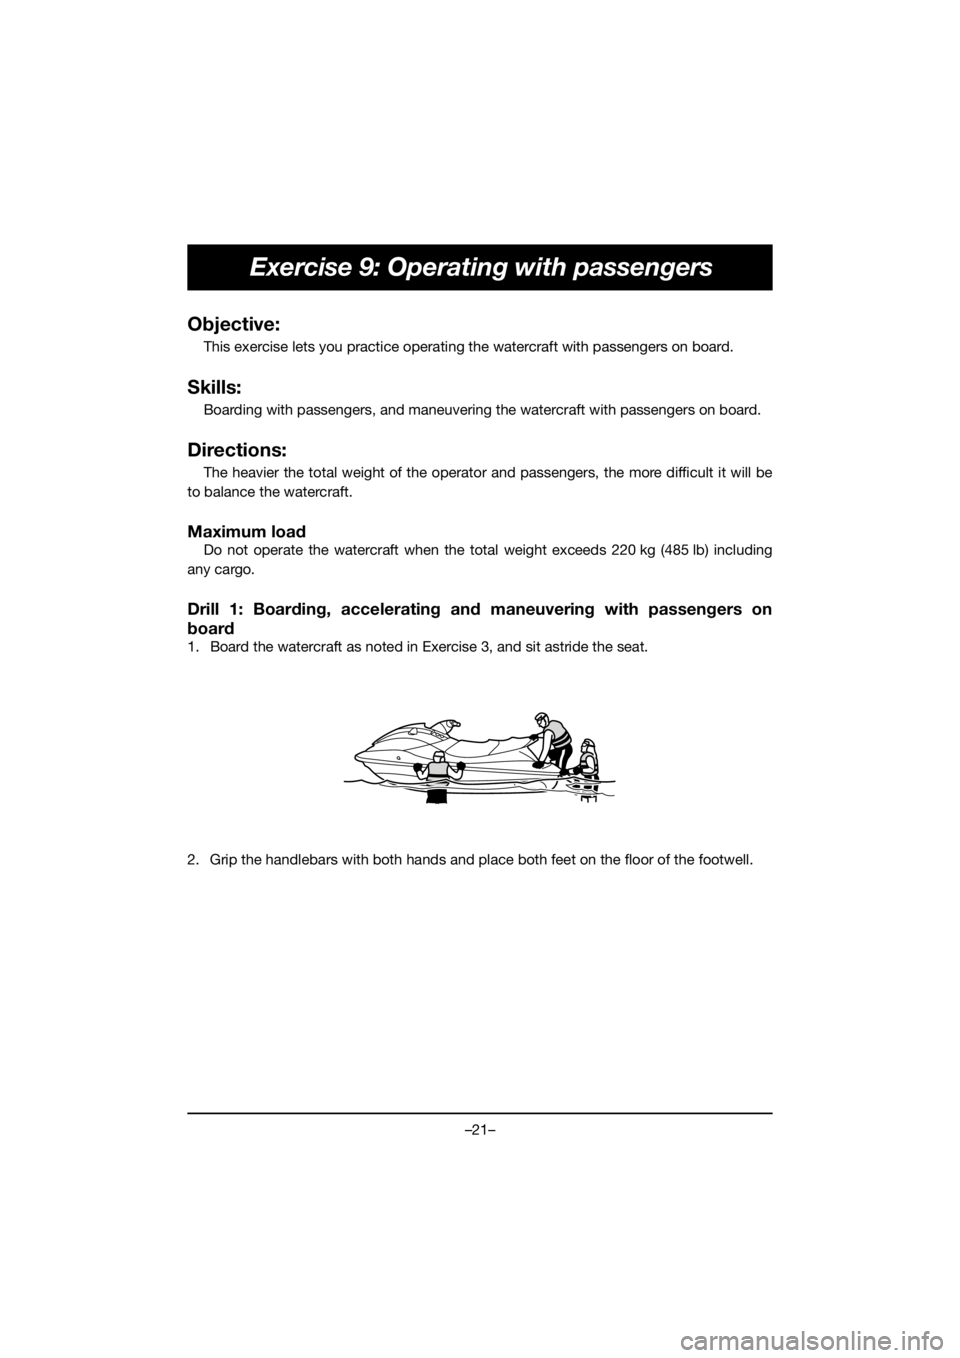 YAMAHA EXR 2020  Manuale duso (in Italian) –21–
Exercise 9: Operating with passengers
Objective:
This exercise lets you practice operating the watercraft with passengers on board.
Skills:
Boarding with passengers, and maneuvering the water